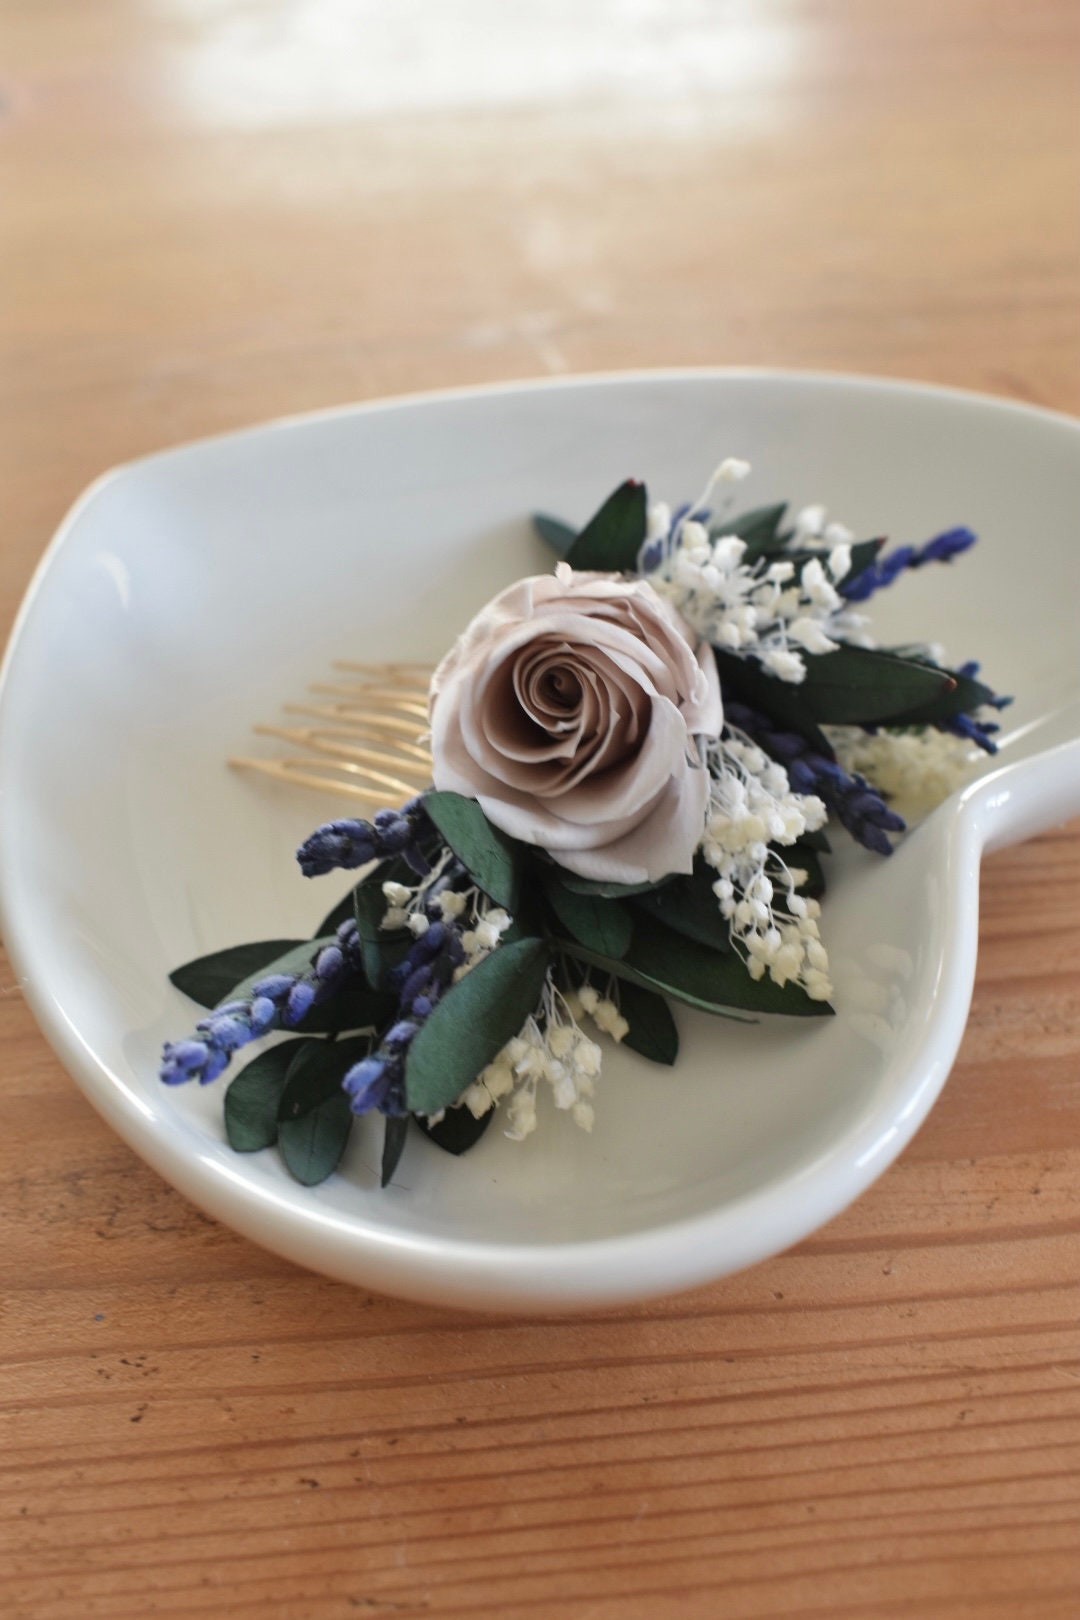 Lavender and rose flower comb